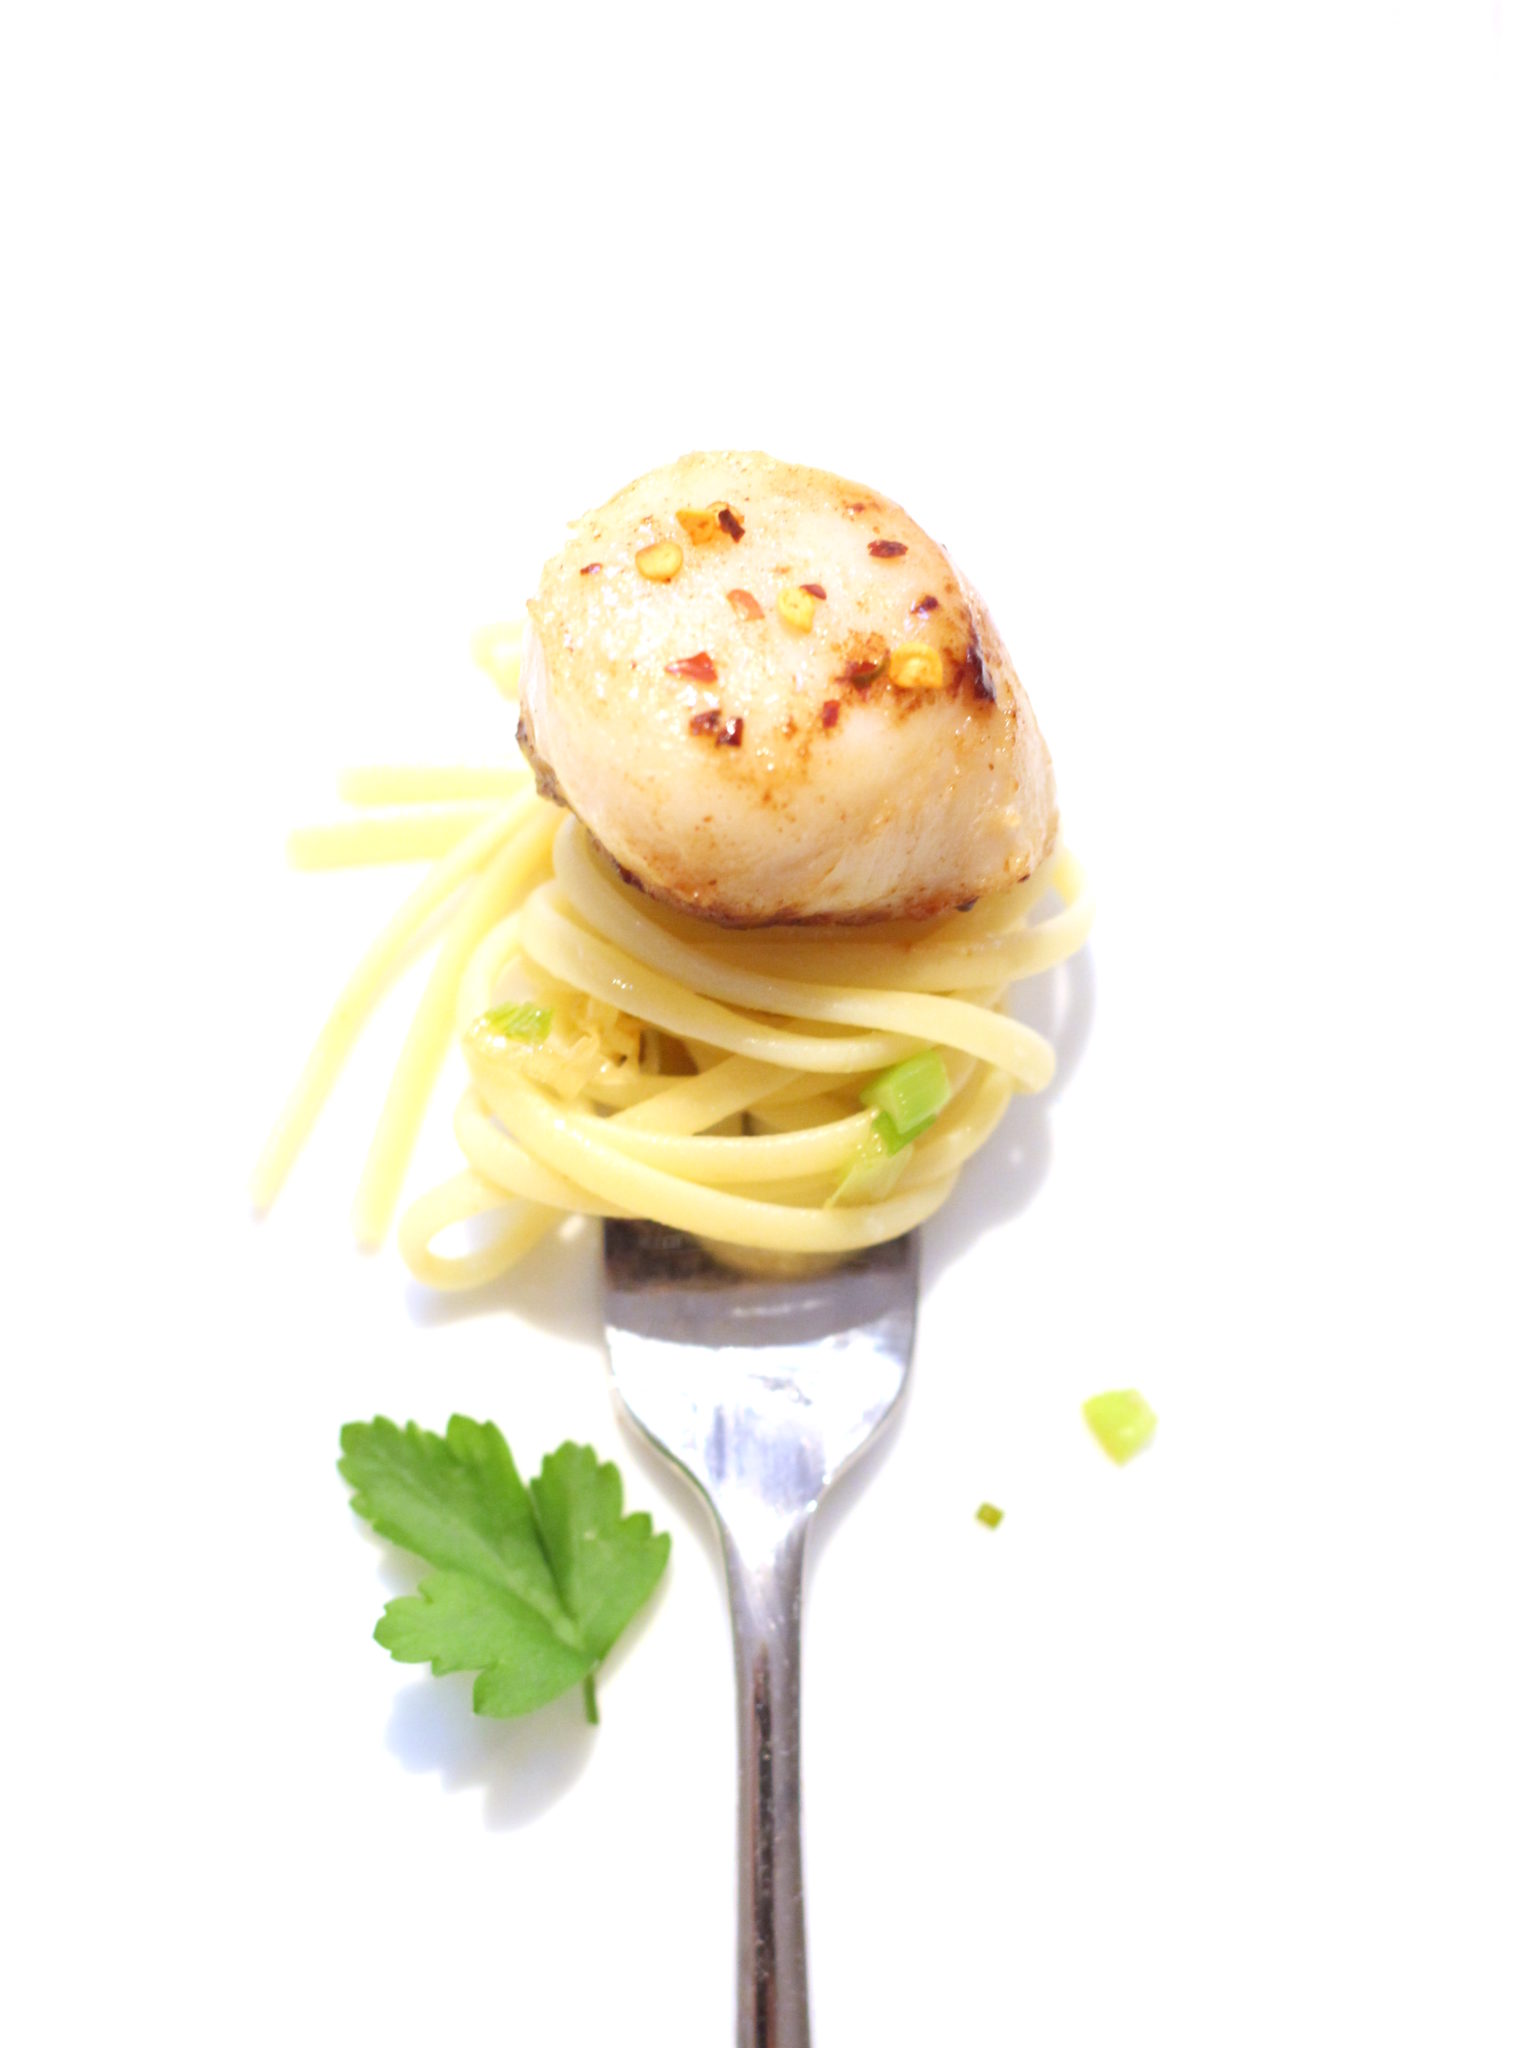 Seared scallops linguine cooked with spring onions and garlic butter - Croque-Maman